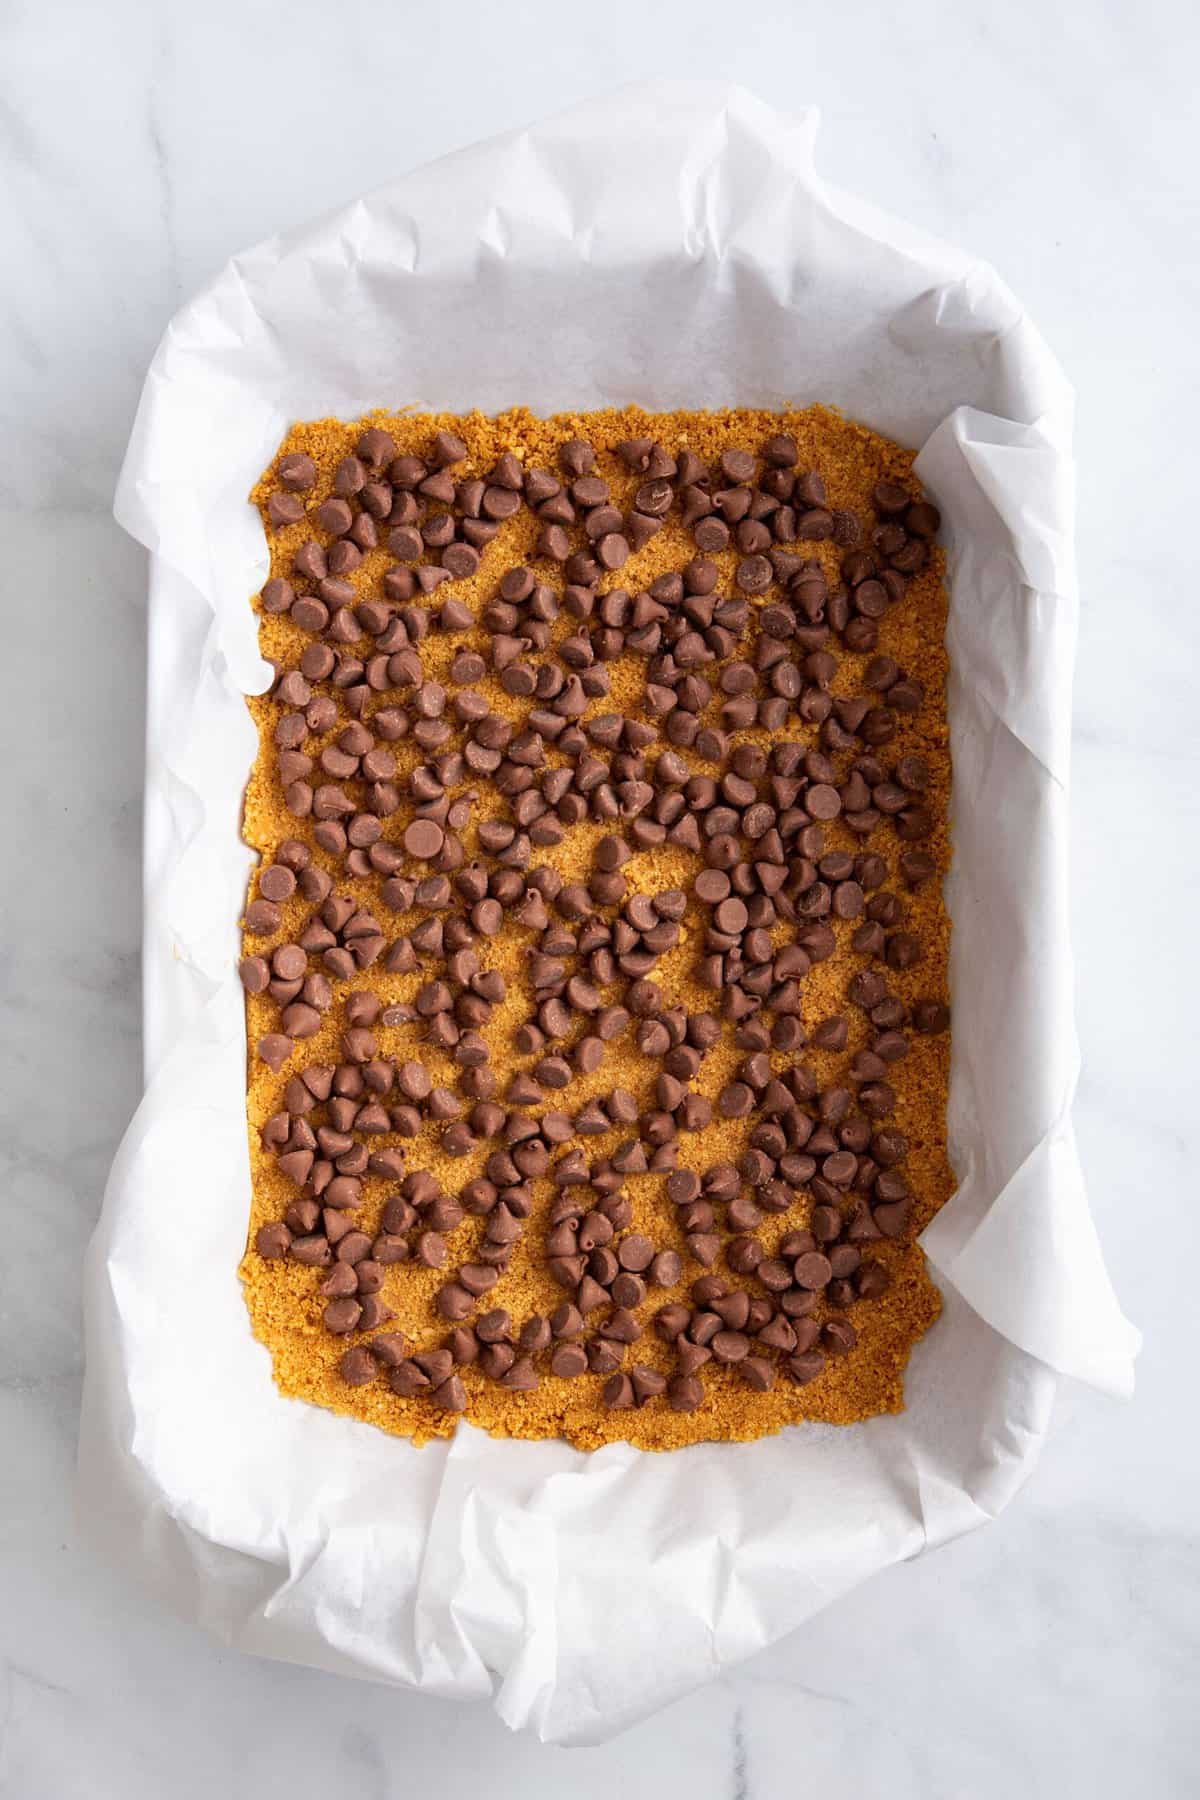 graham cracker crust pressed into a parchment paper lined 9x13 baking dish topped with a layer of milk chocolate chips